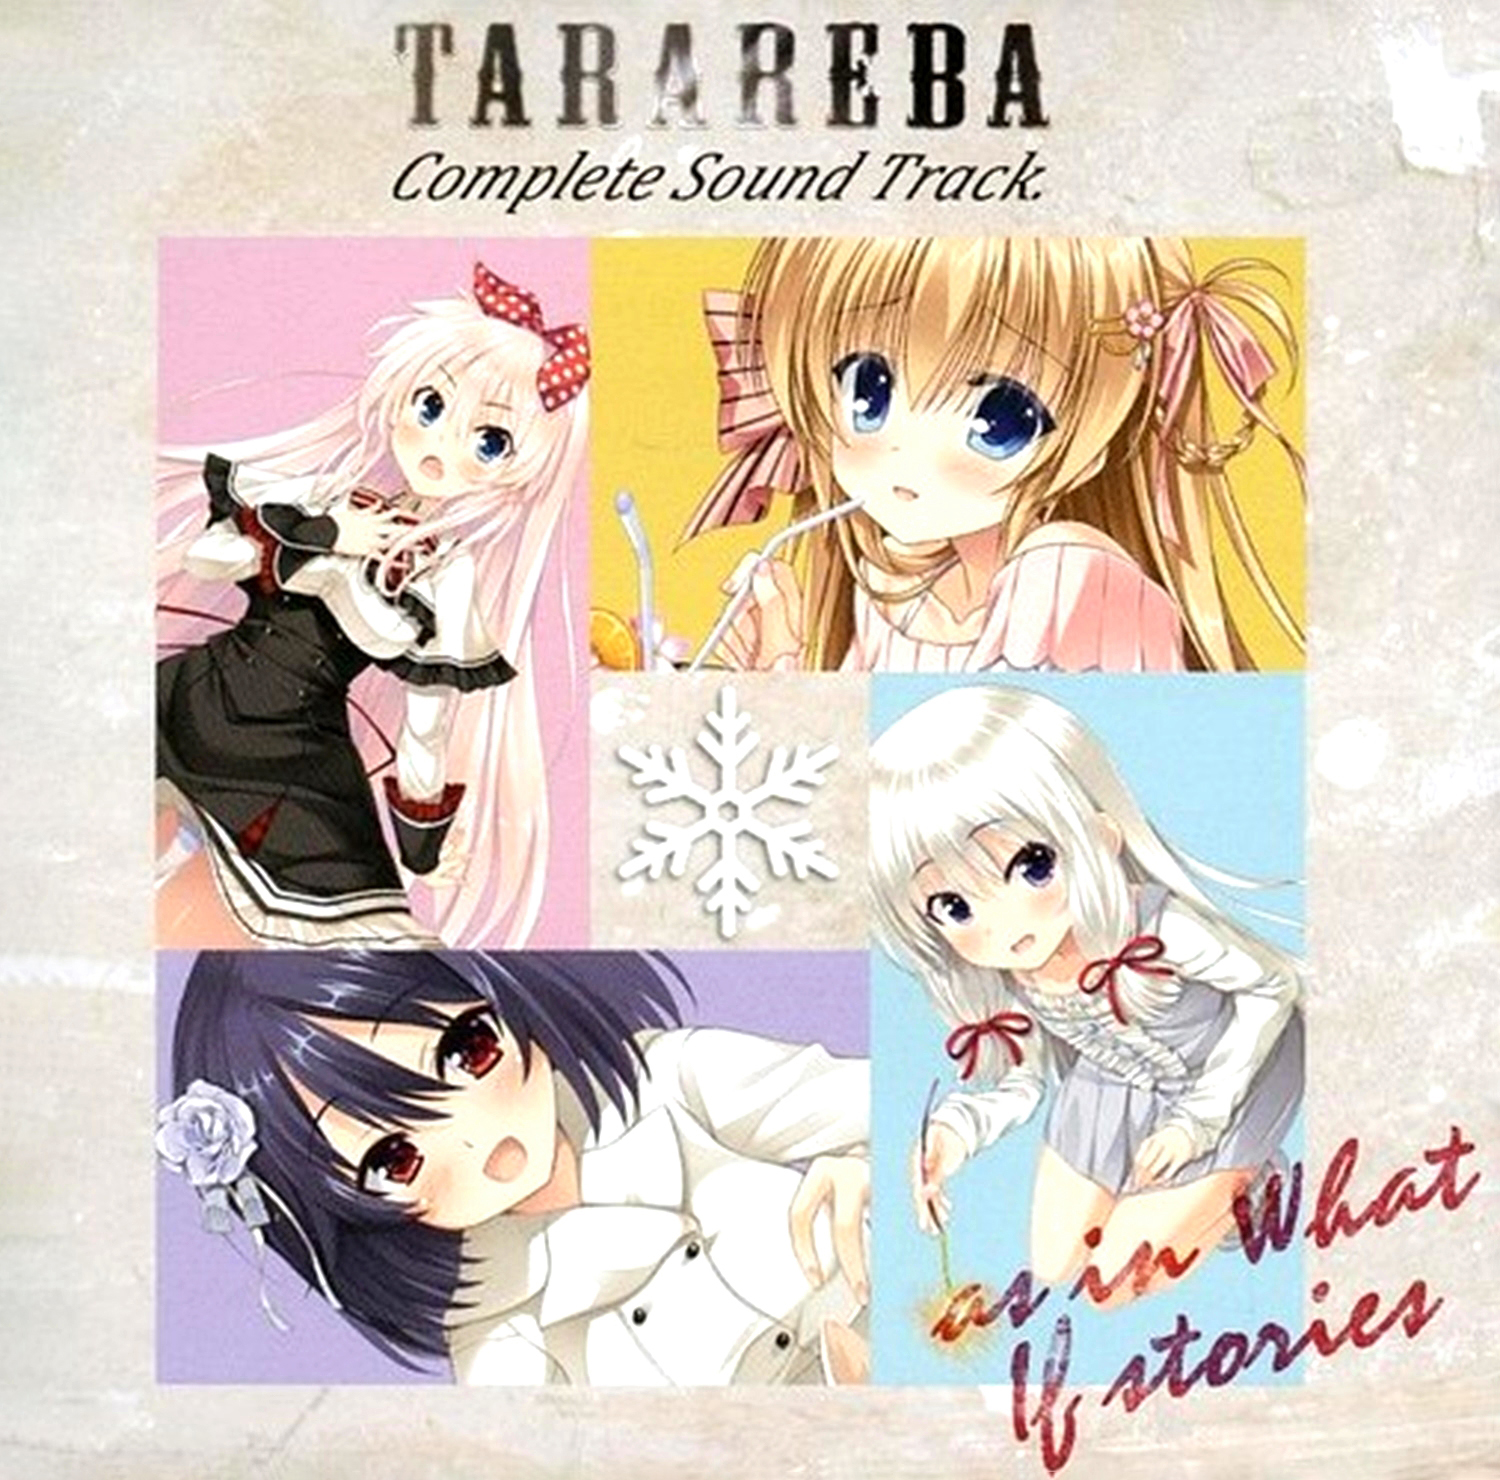 【WAV】ゲーム「タラレバ ～as in What if stories～」Complete Sound Track／Aries